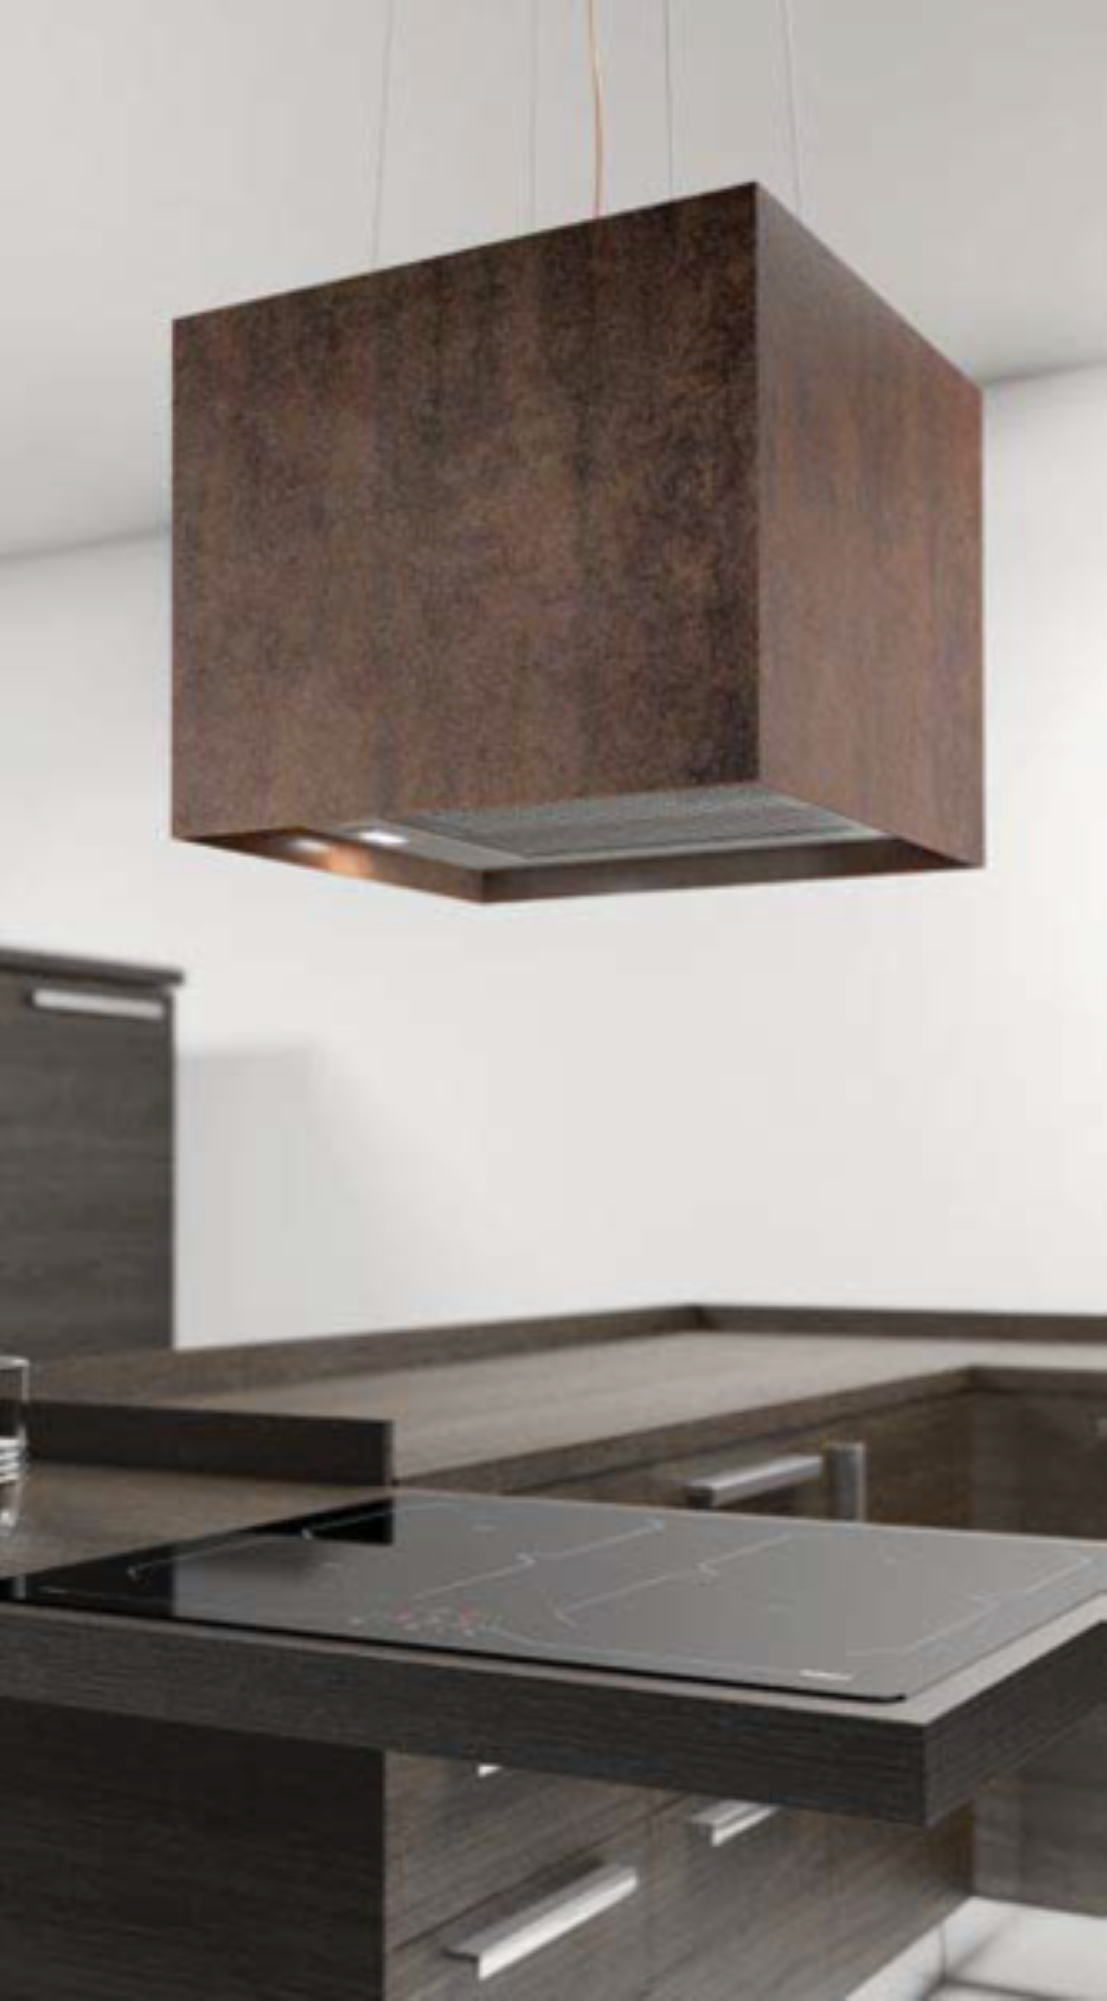 Airforce Concrete 40cm Island Lamp Cooker Hood with Integra System - Brown Oxide